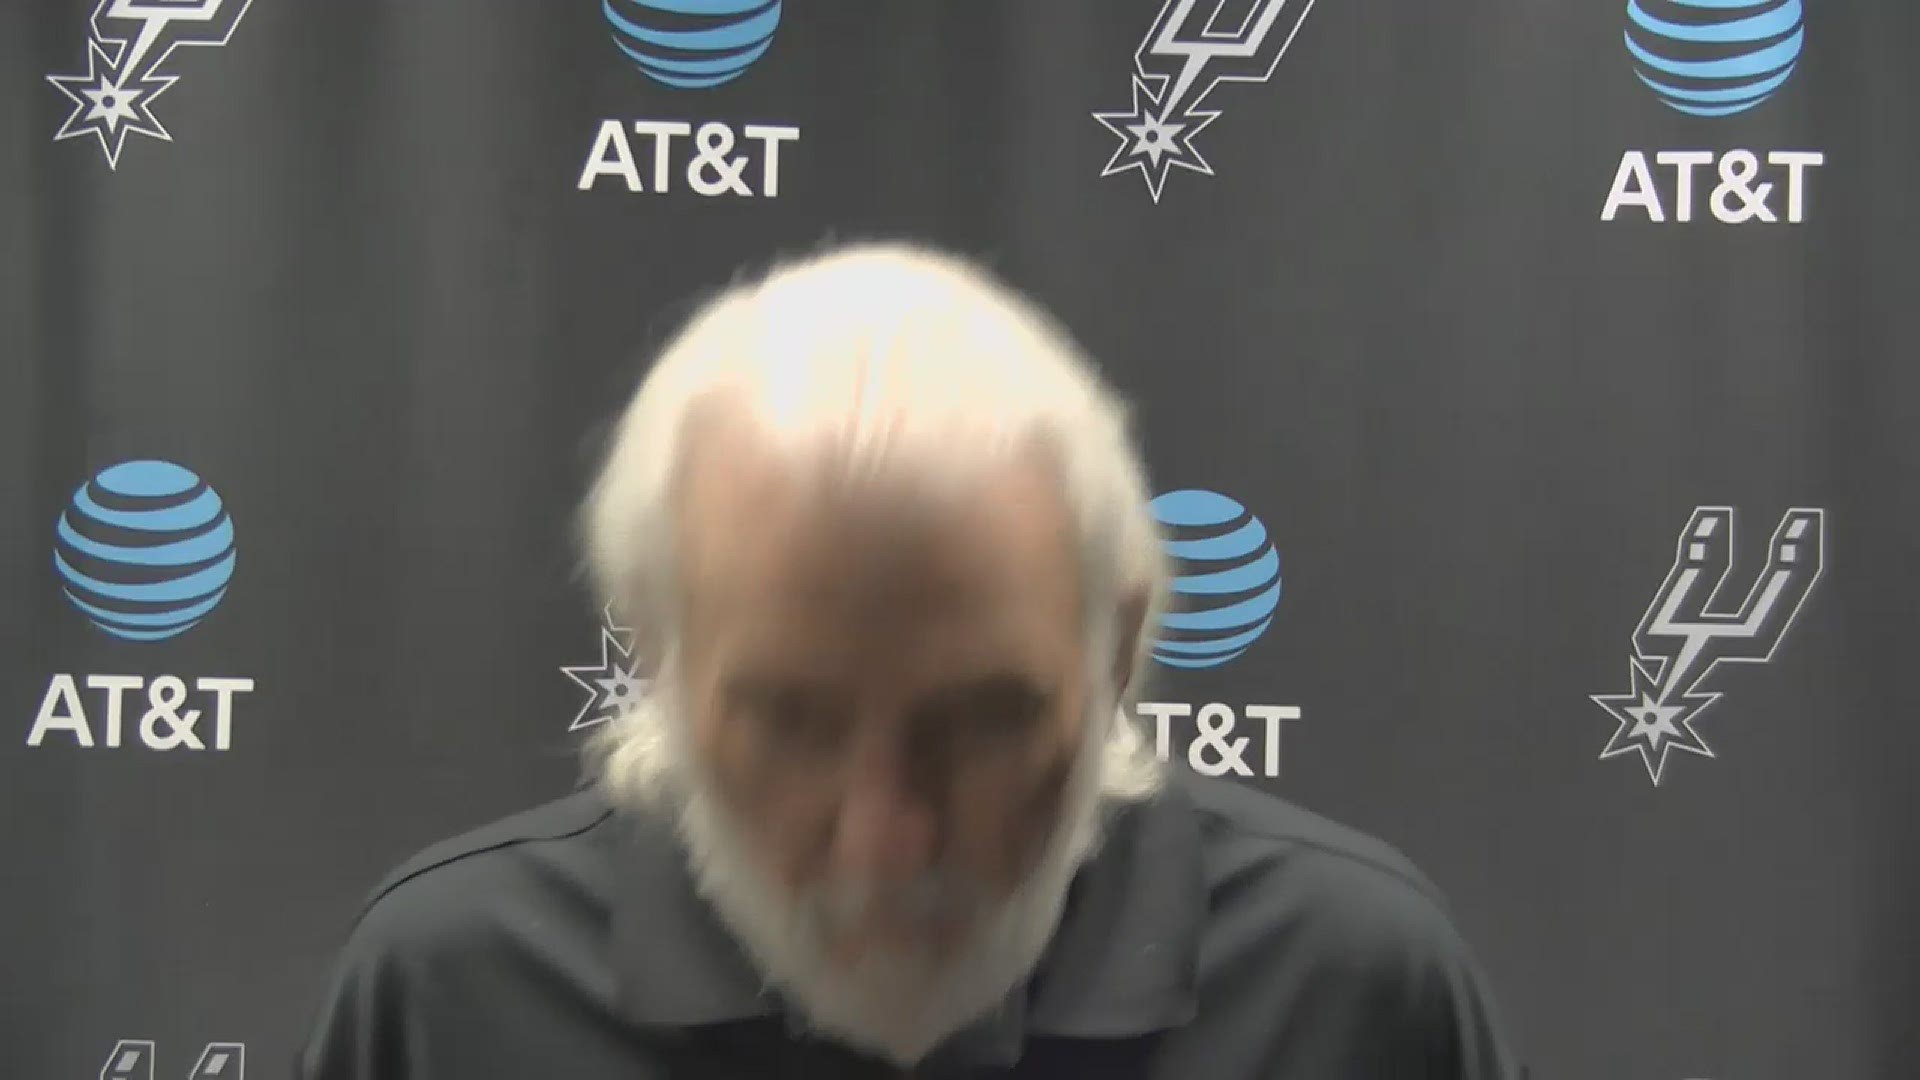 Coach Gregg Popovich discusses the mental toughness of his team after playing for 58 minutes on the second night of a back-to-back.